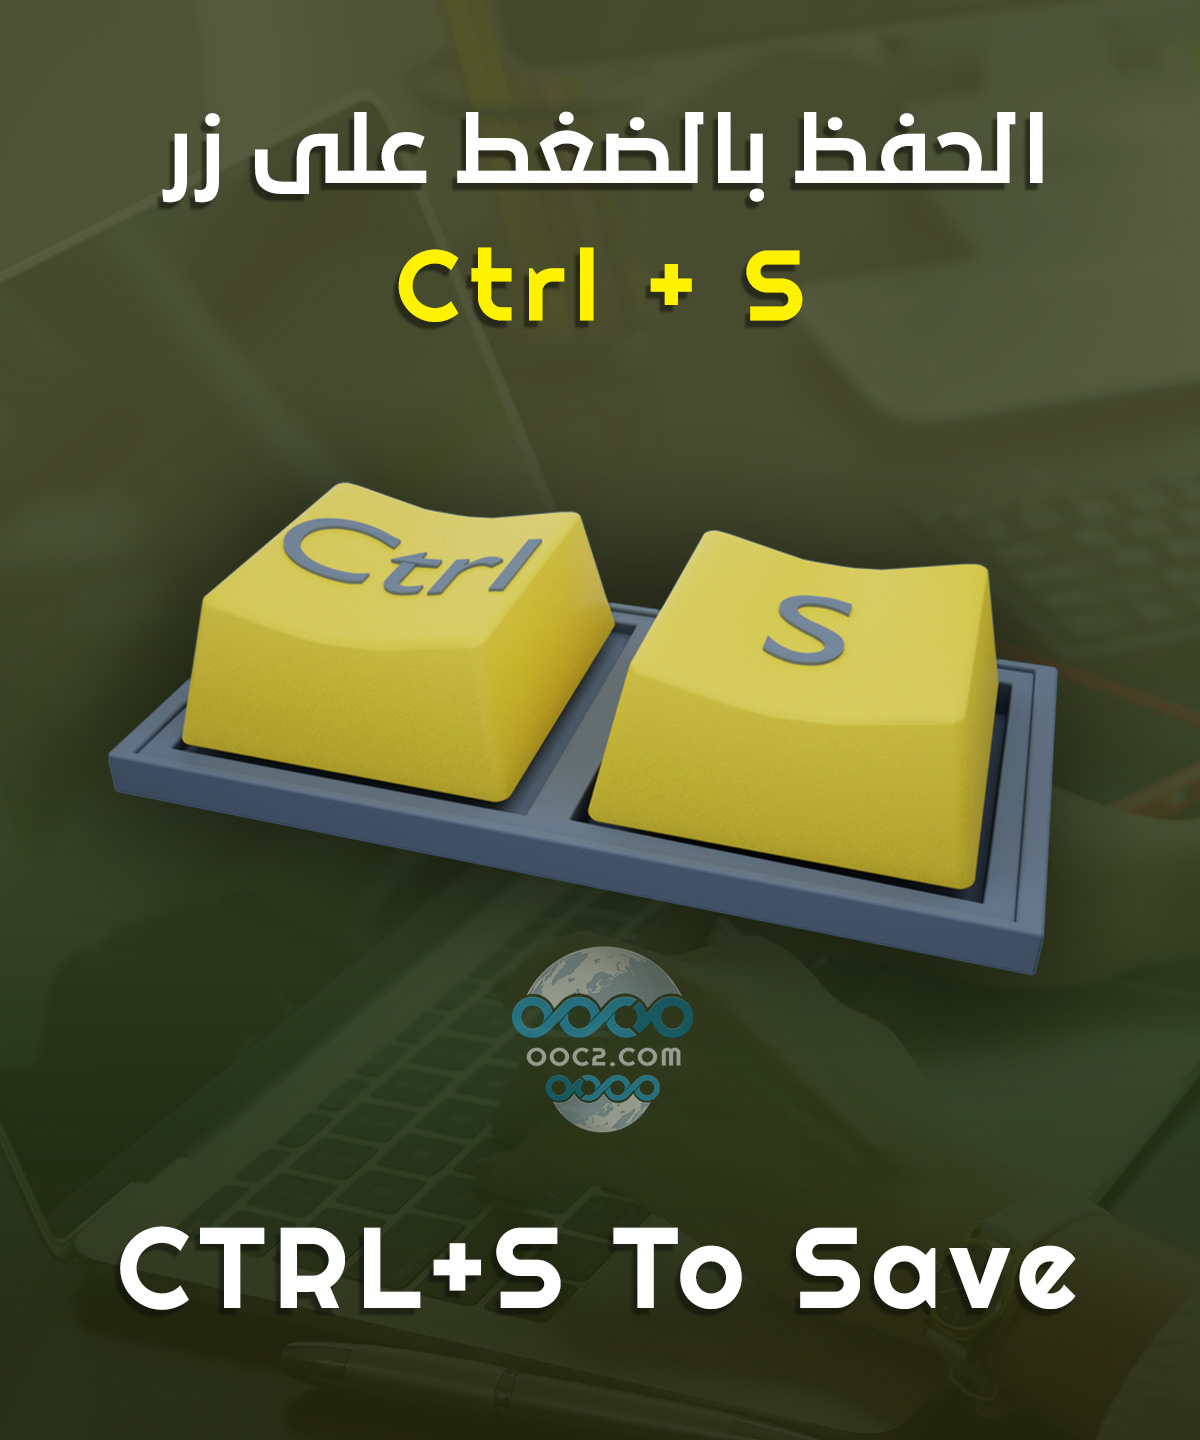 CTRL+S To Save